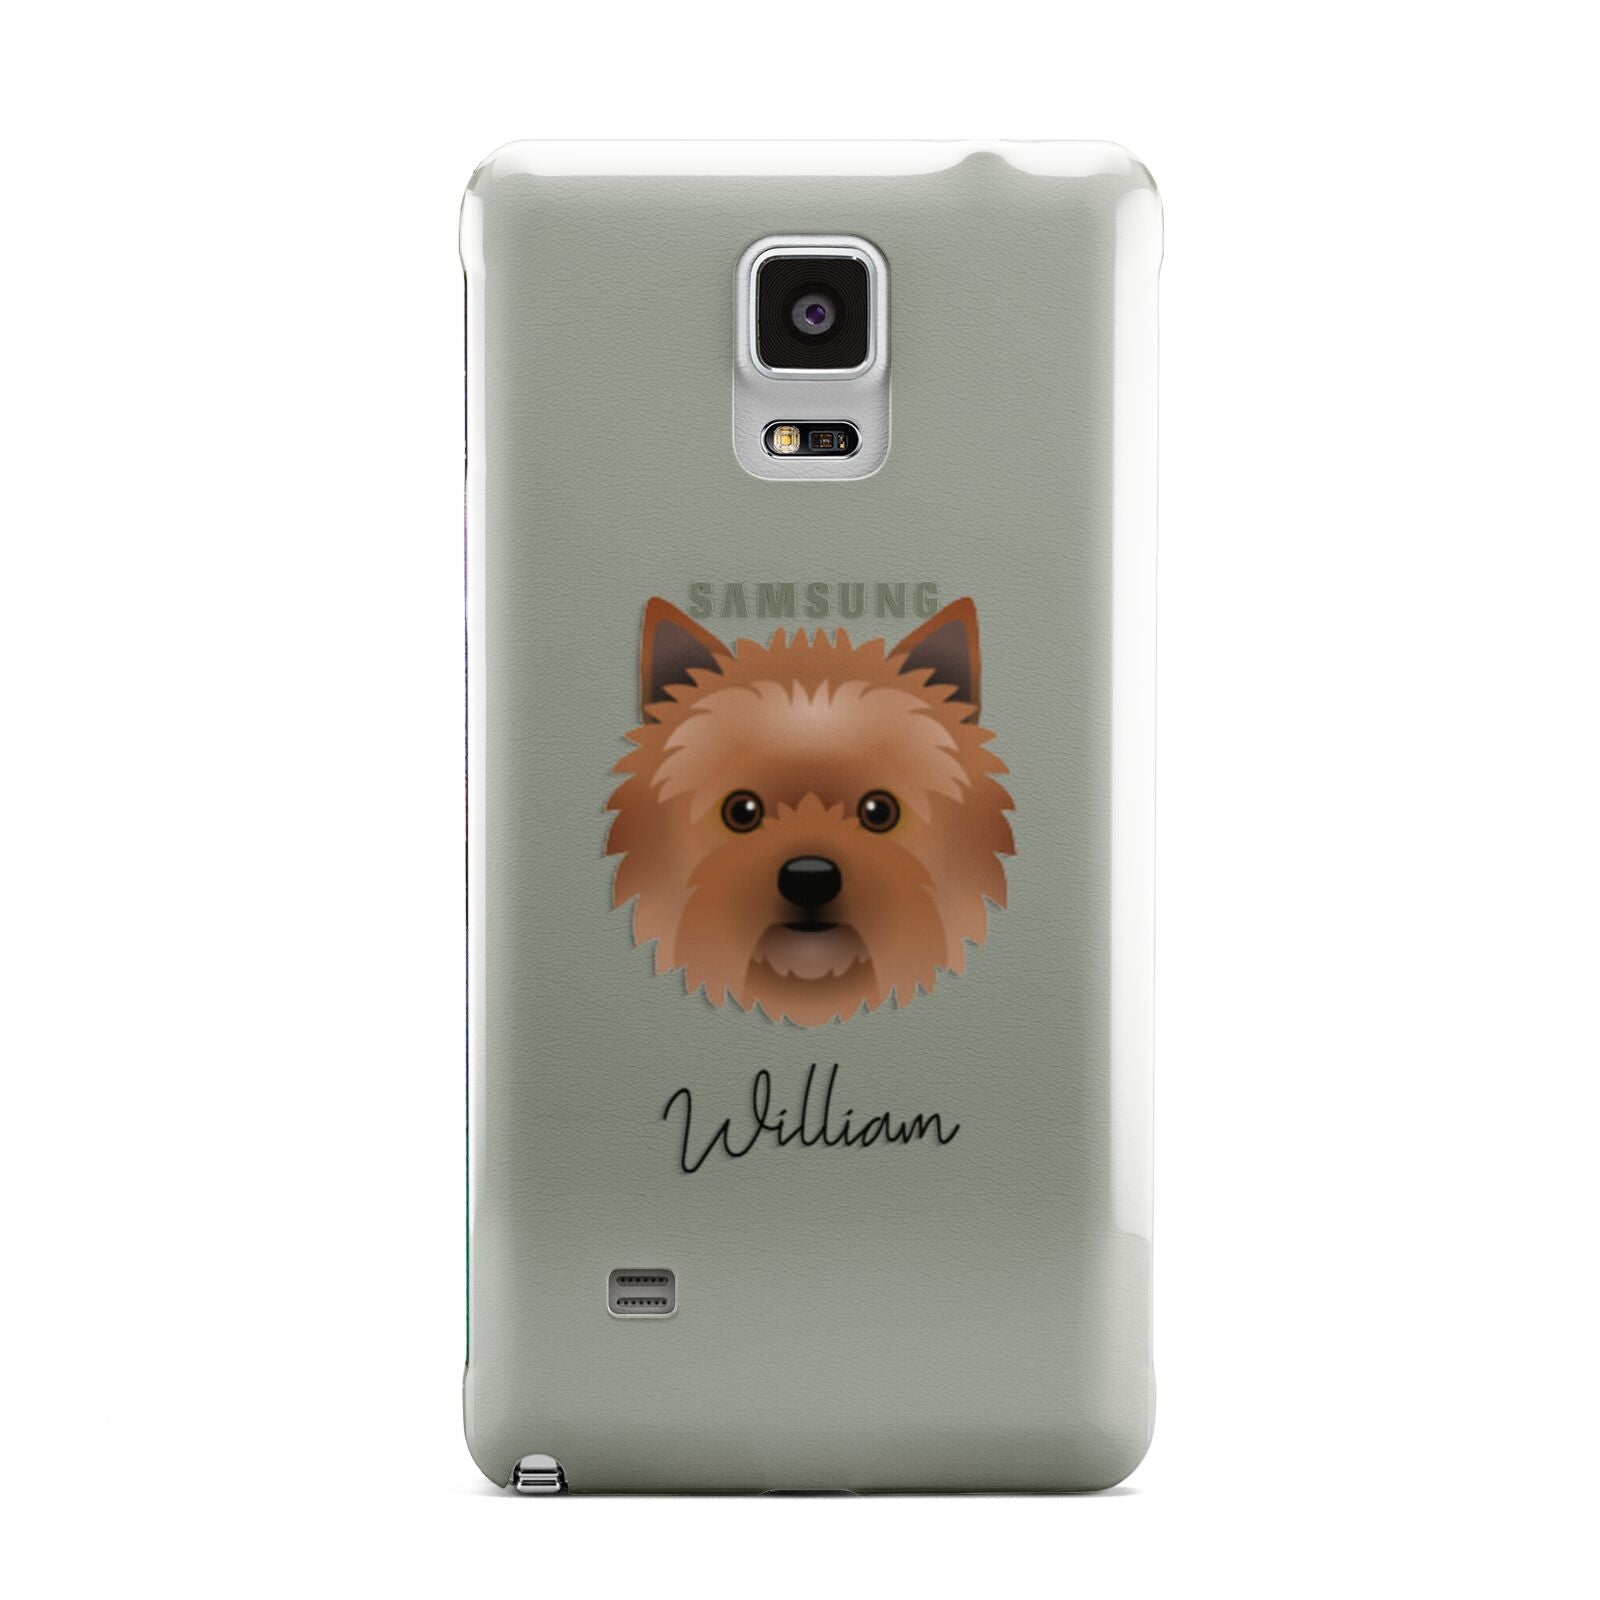 Cairn Terrier Personalised Samsung Galaxy Note 4 Case